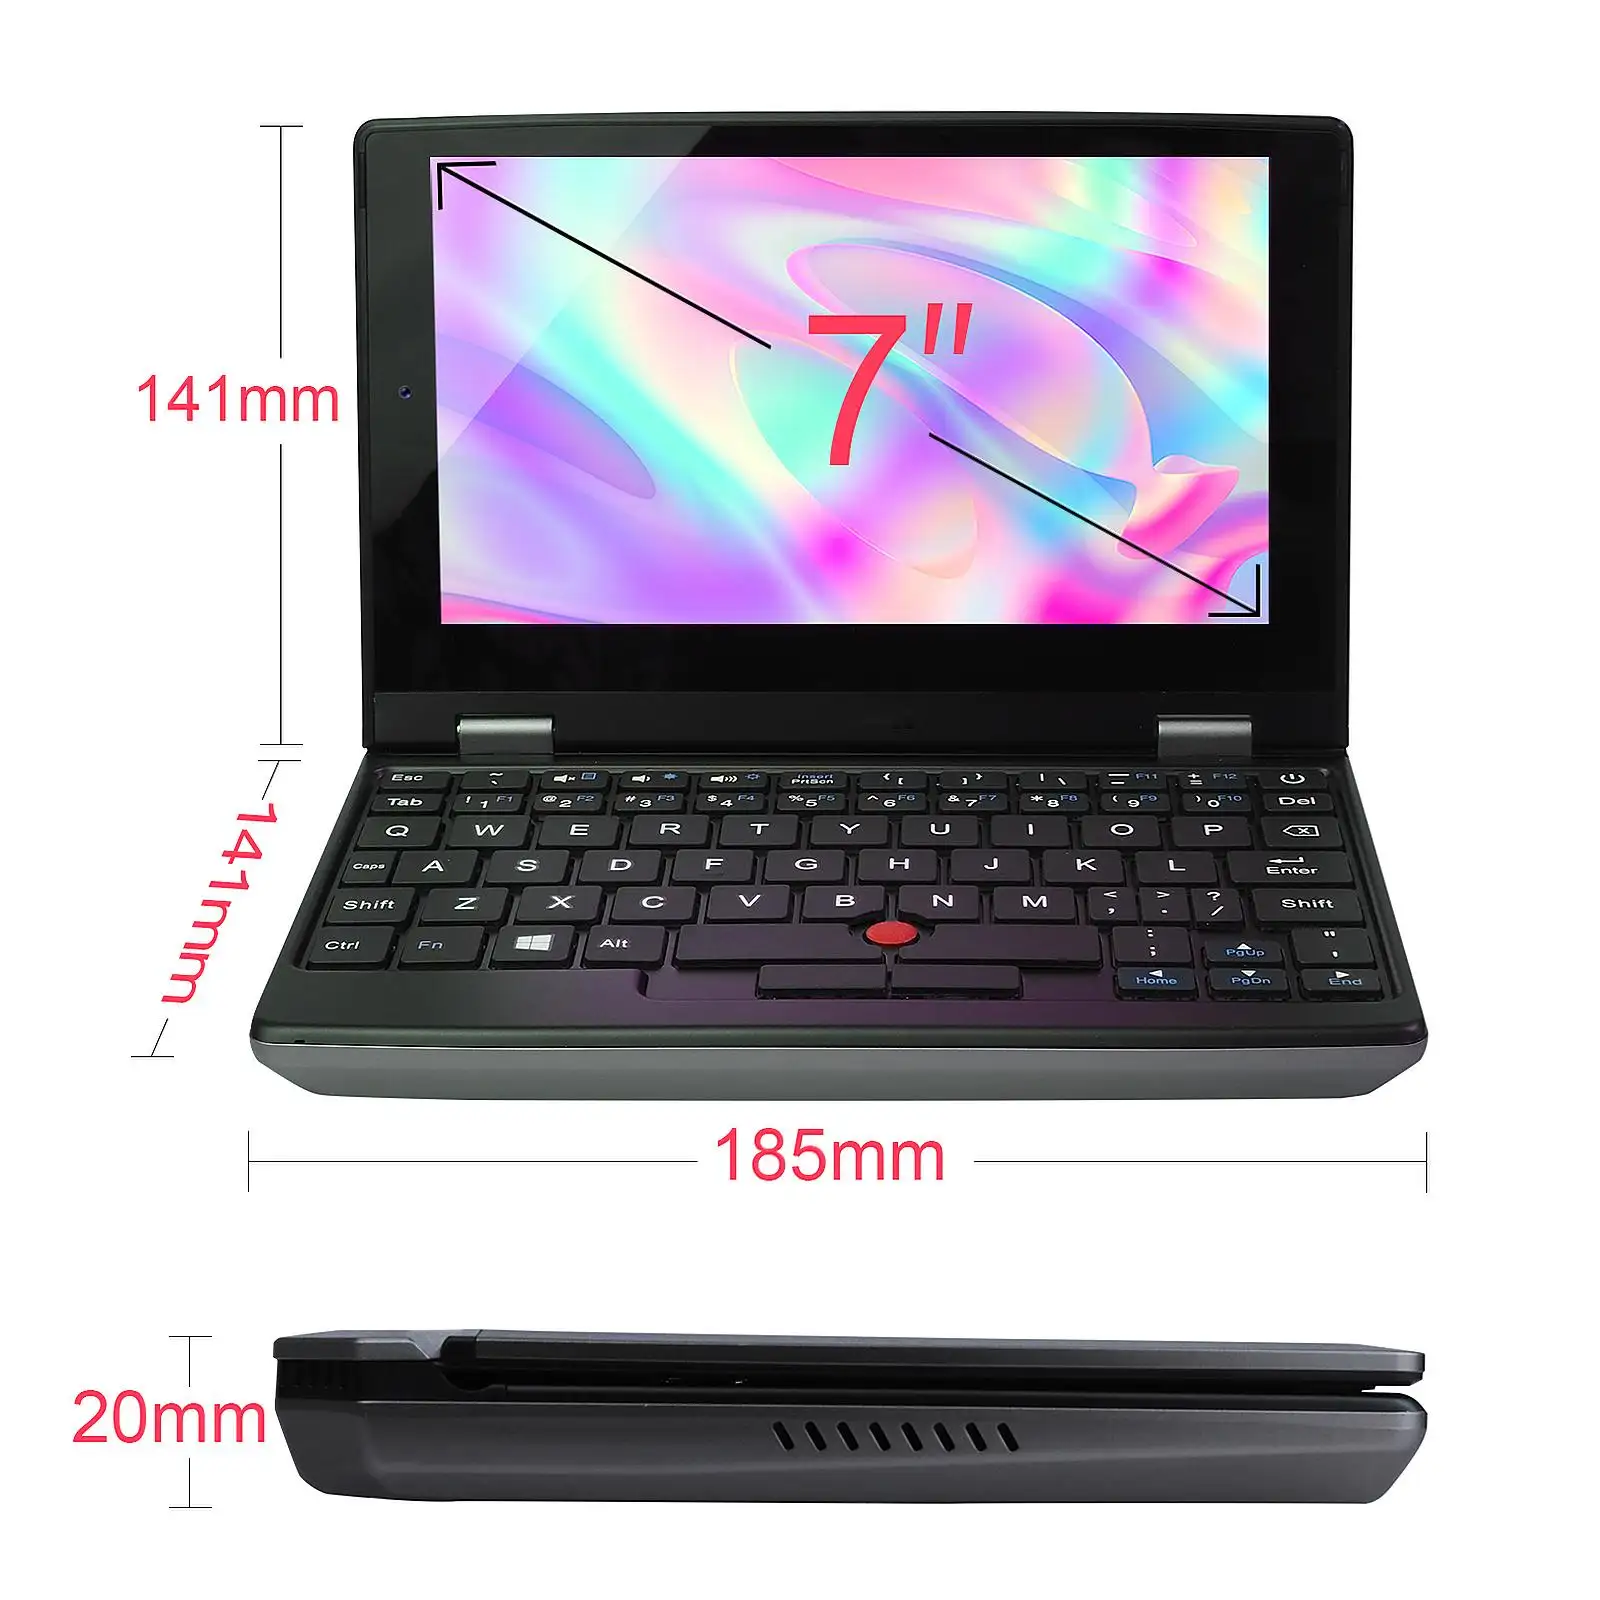 Wholesale Stylish Laptop All Metal 7 Inch Touch Screen High-Speed Cpu J4125 12G Ram 512Gb Ssd High Performance Notebook Computer